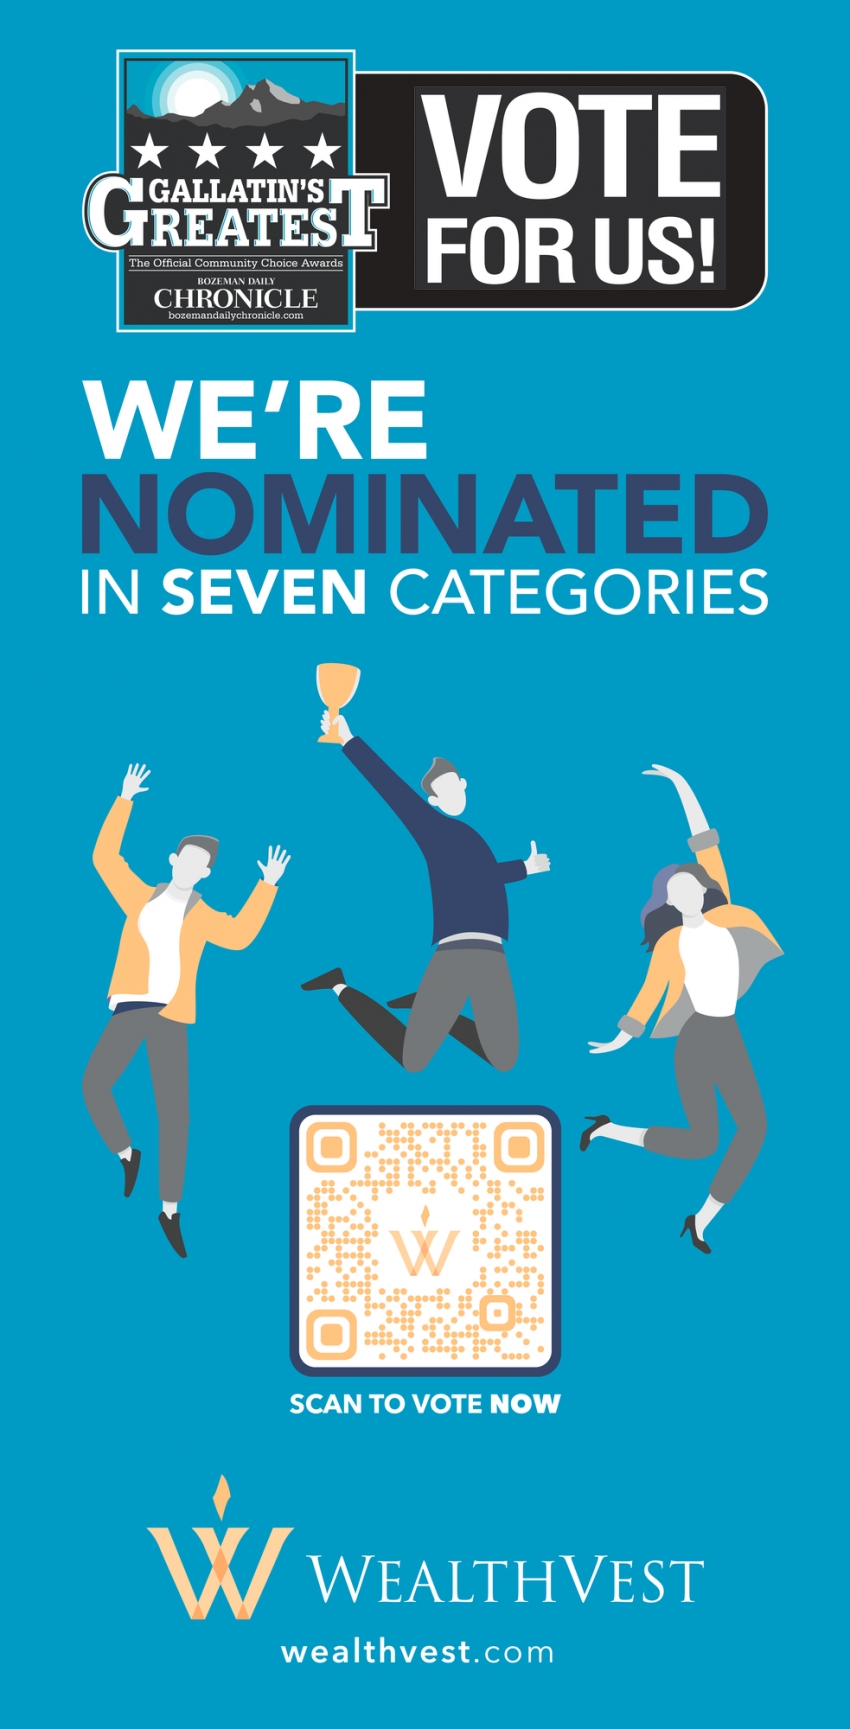 We're Nominated in Seven Categories